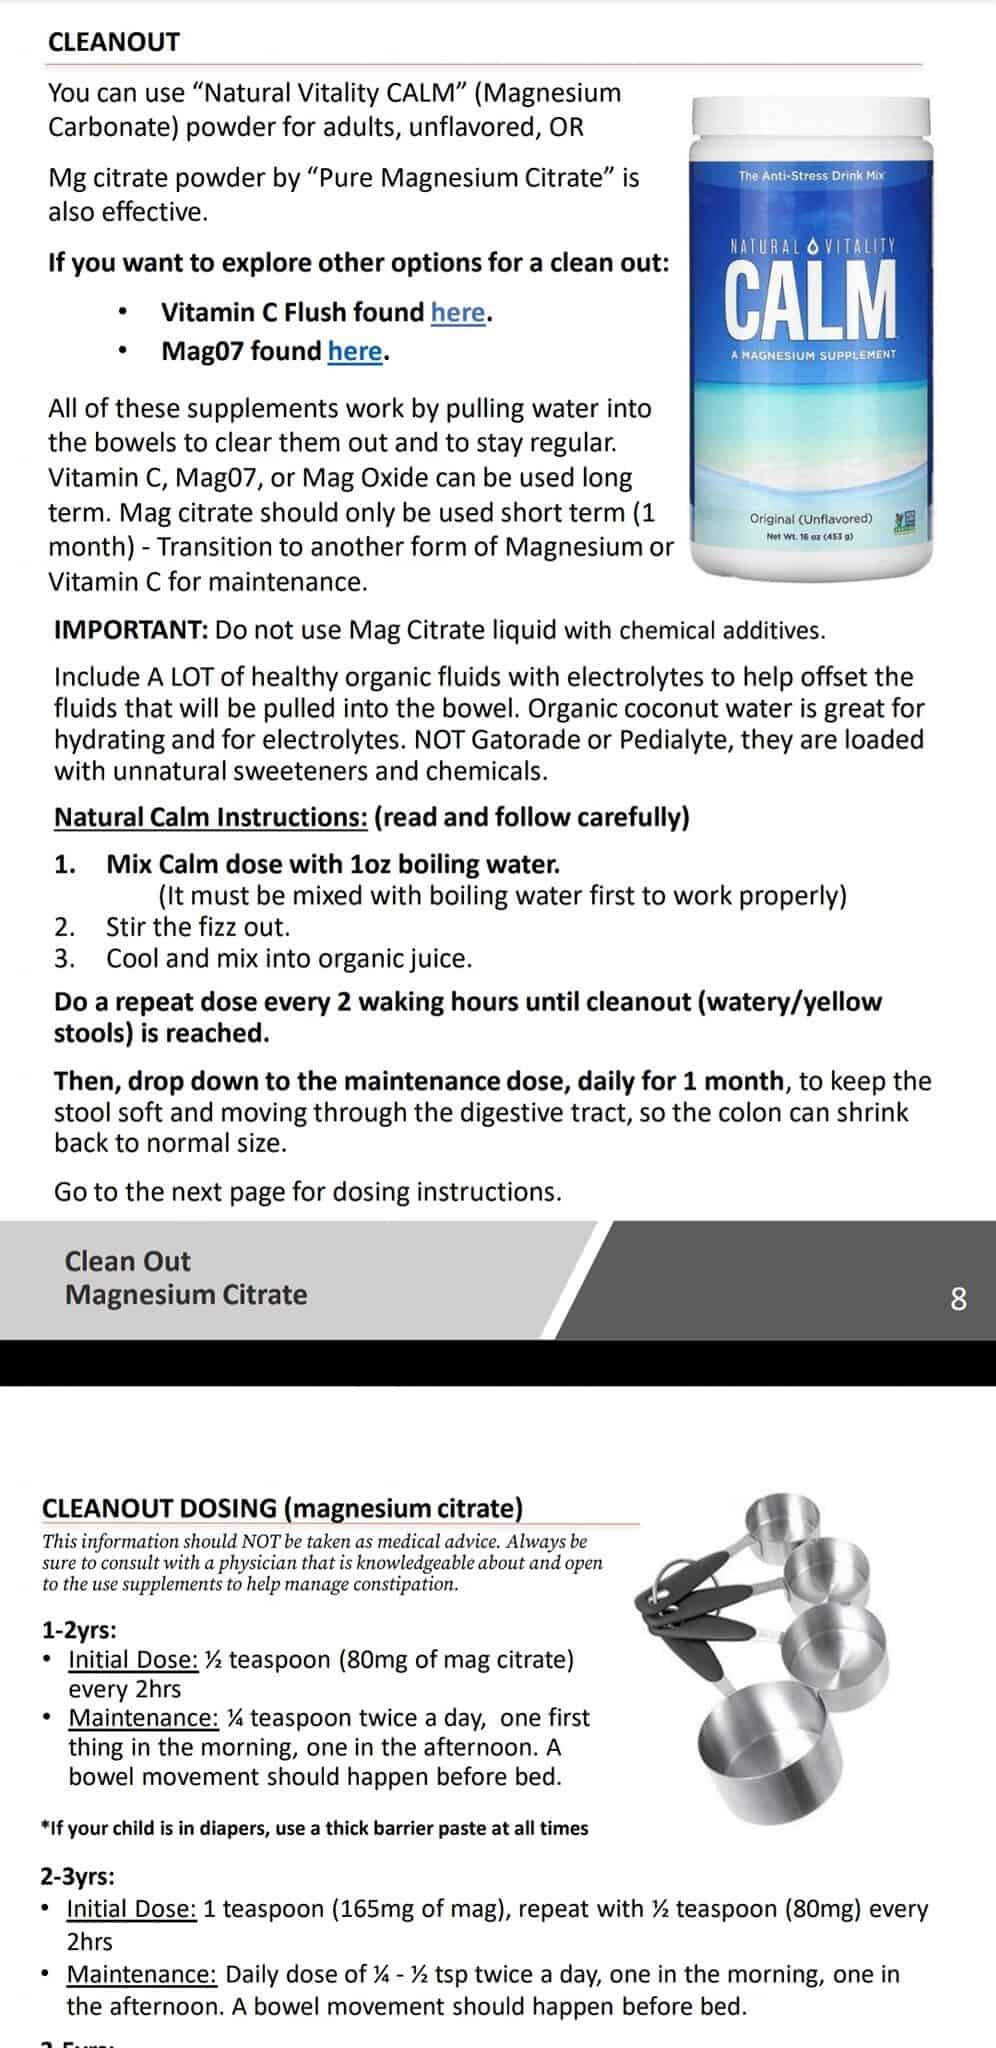 clean out instructions for using magnesium citrate for constipation relief